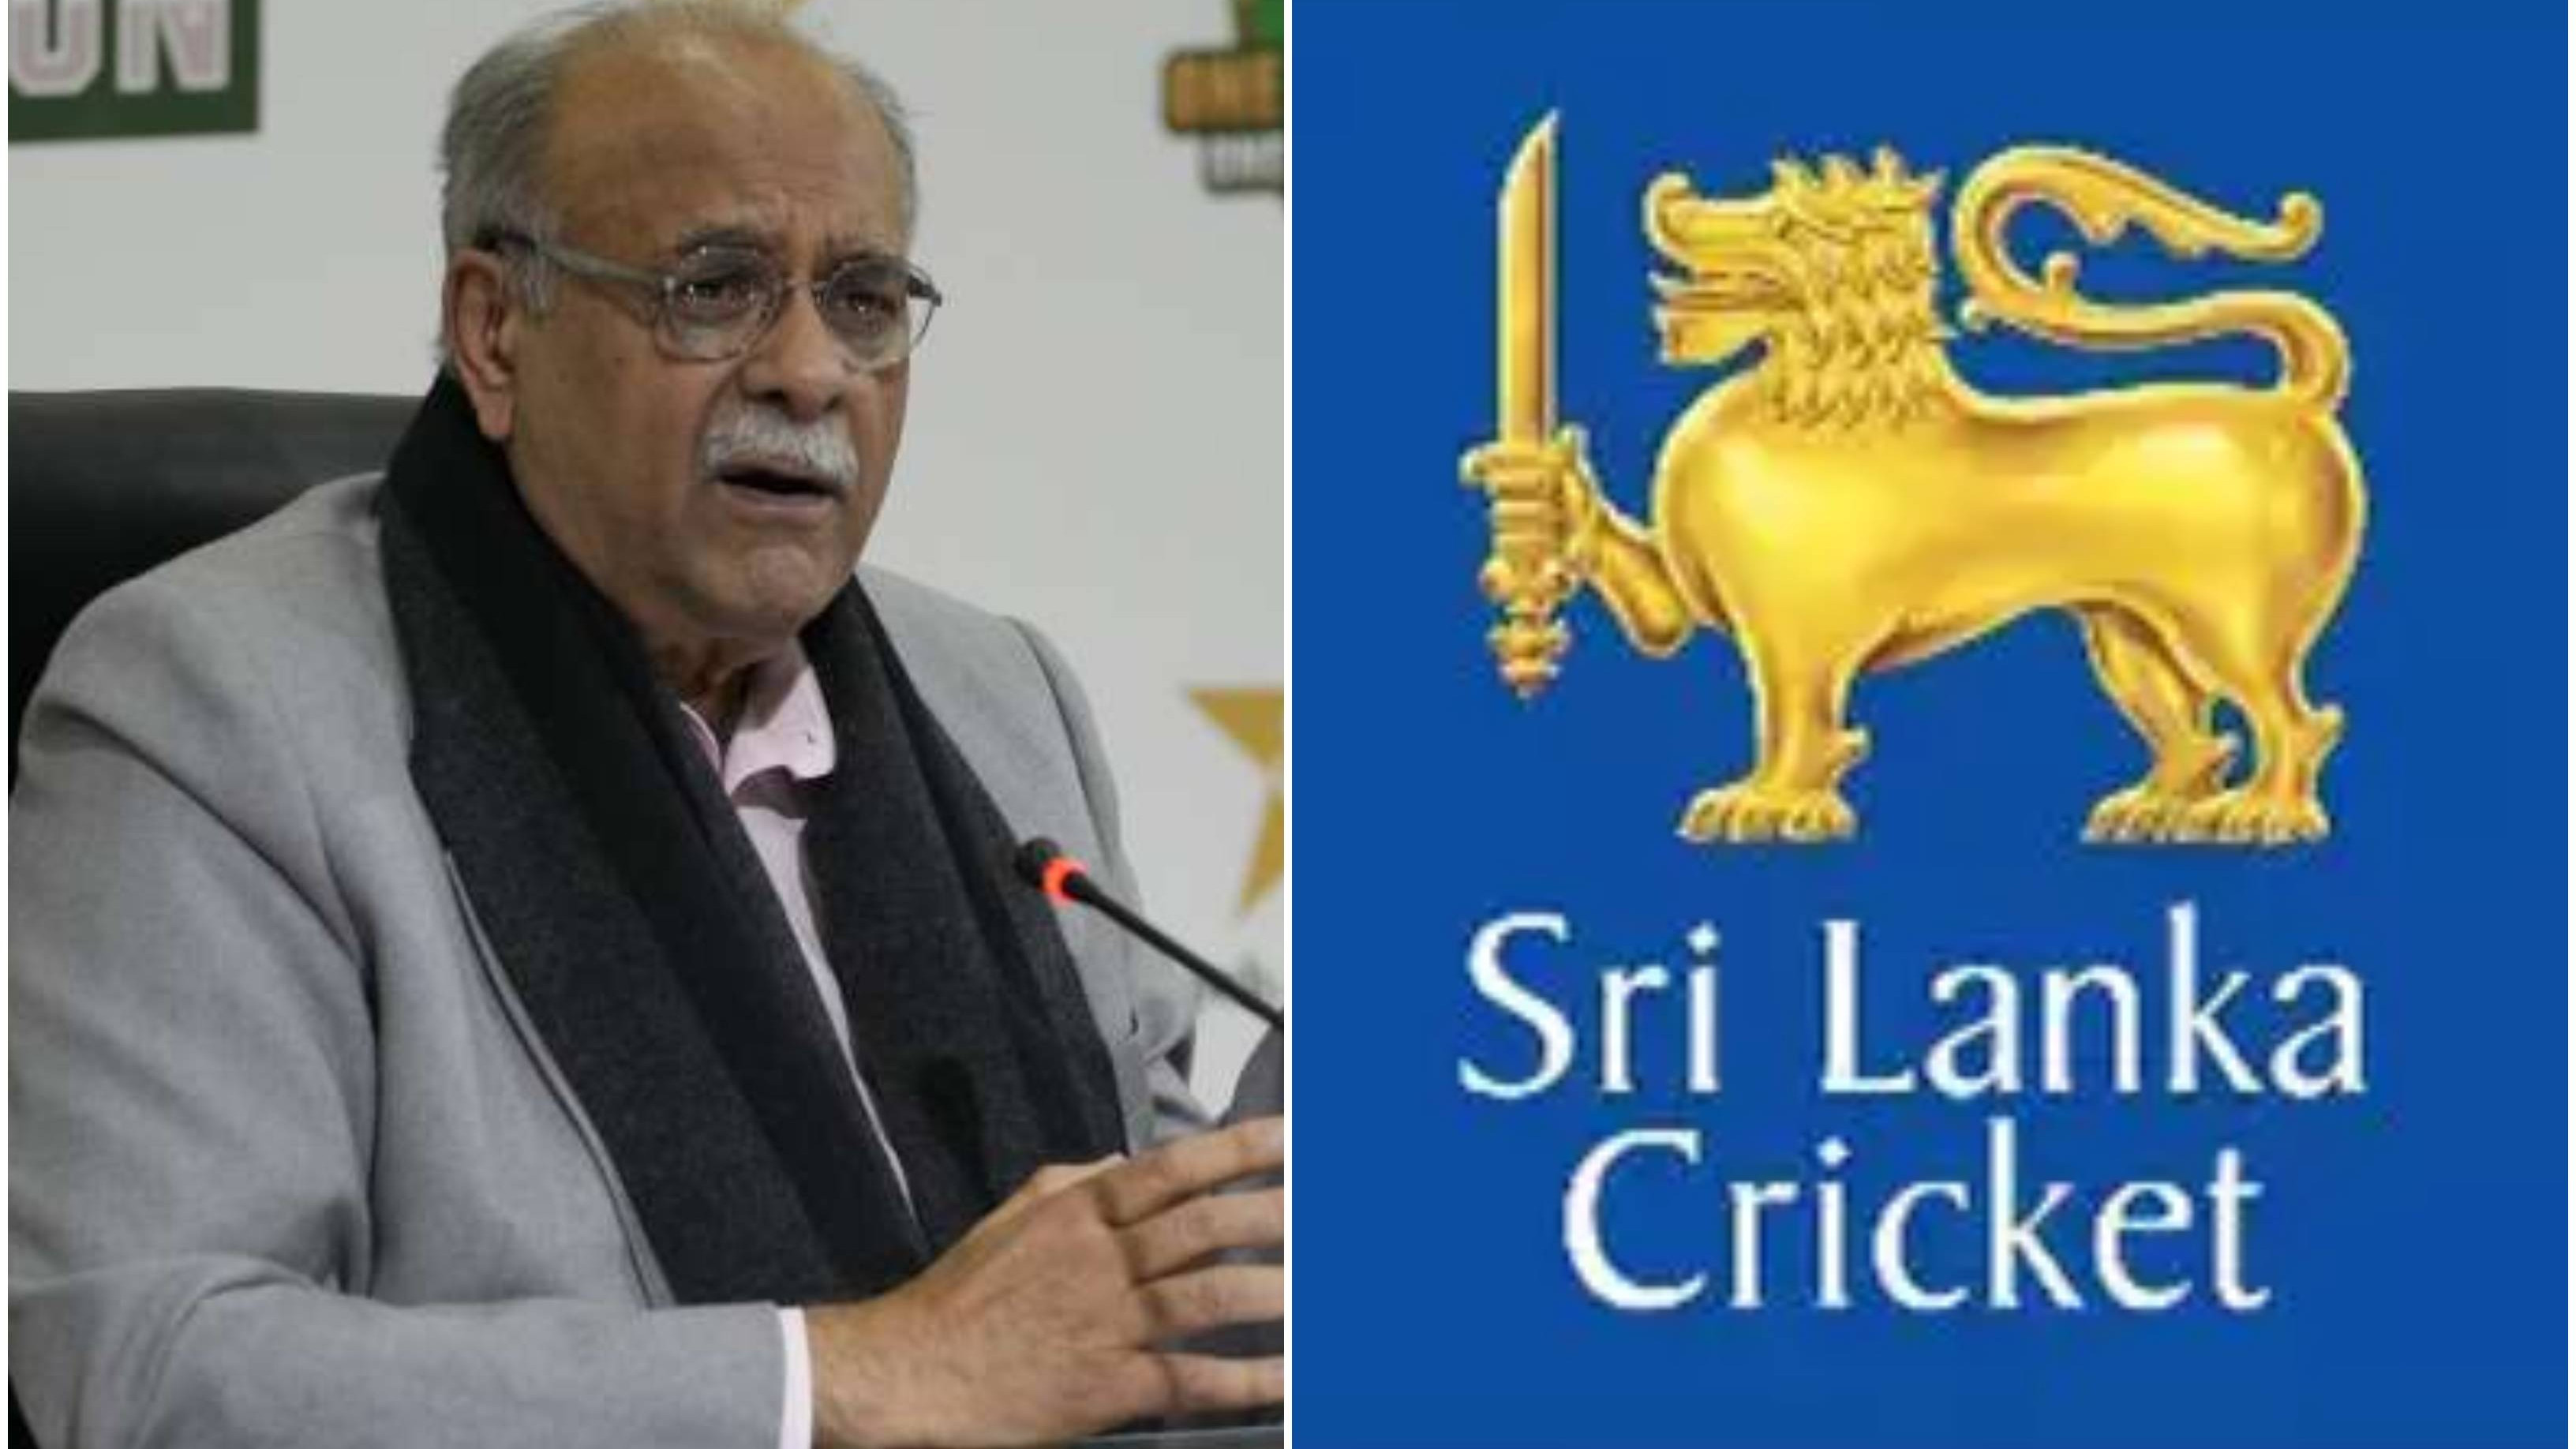 PCB declines to play ODI series in Sri Lanka after SLC expresses desire to host entire Asia Cup 2023: Report